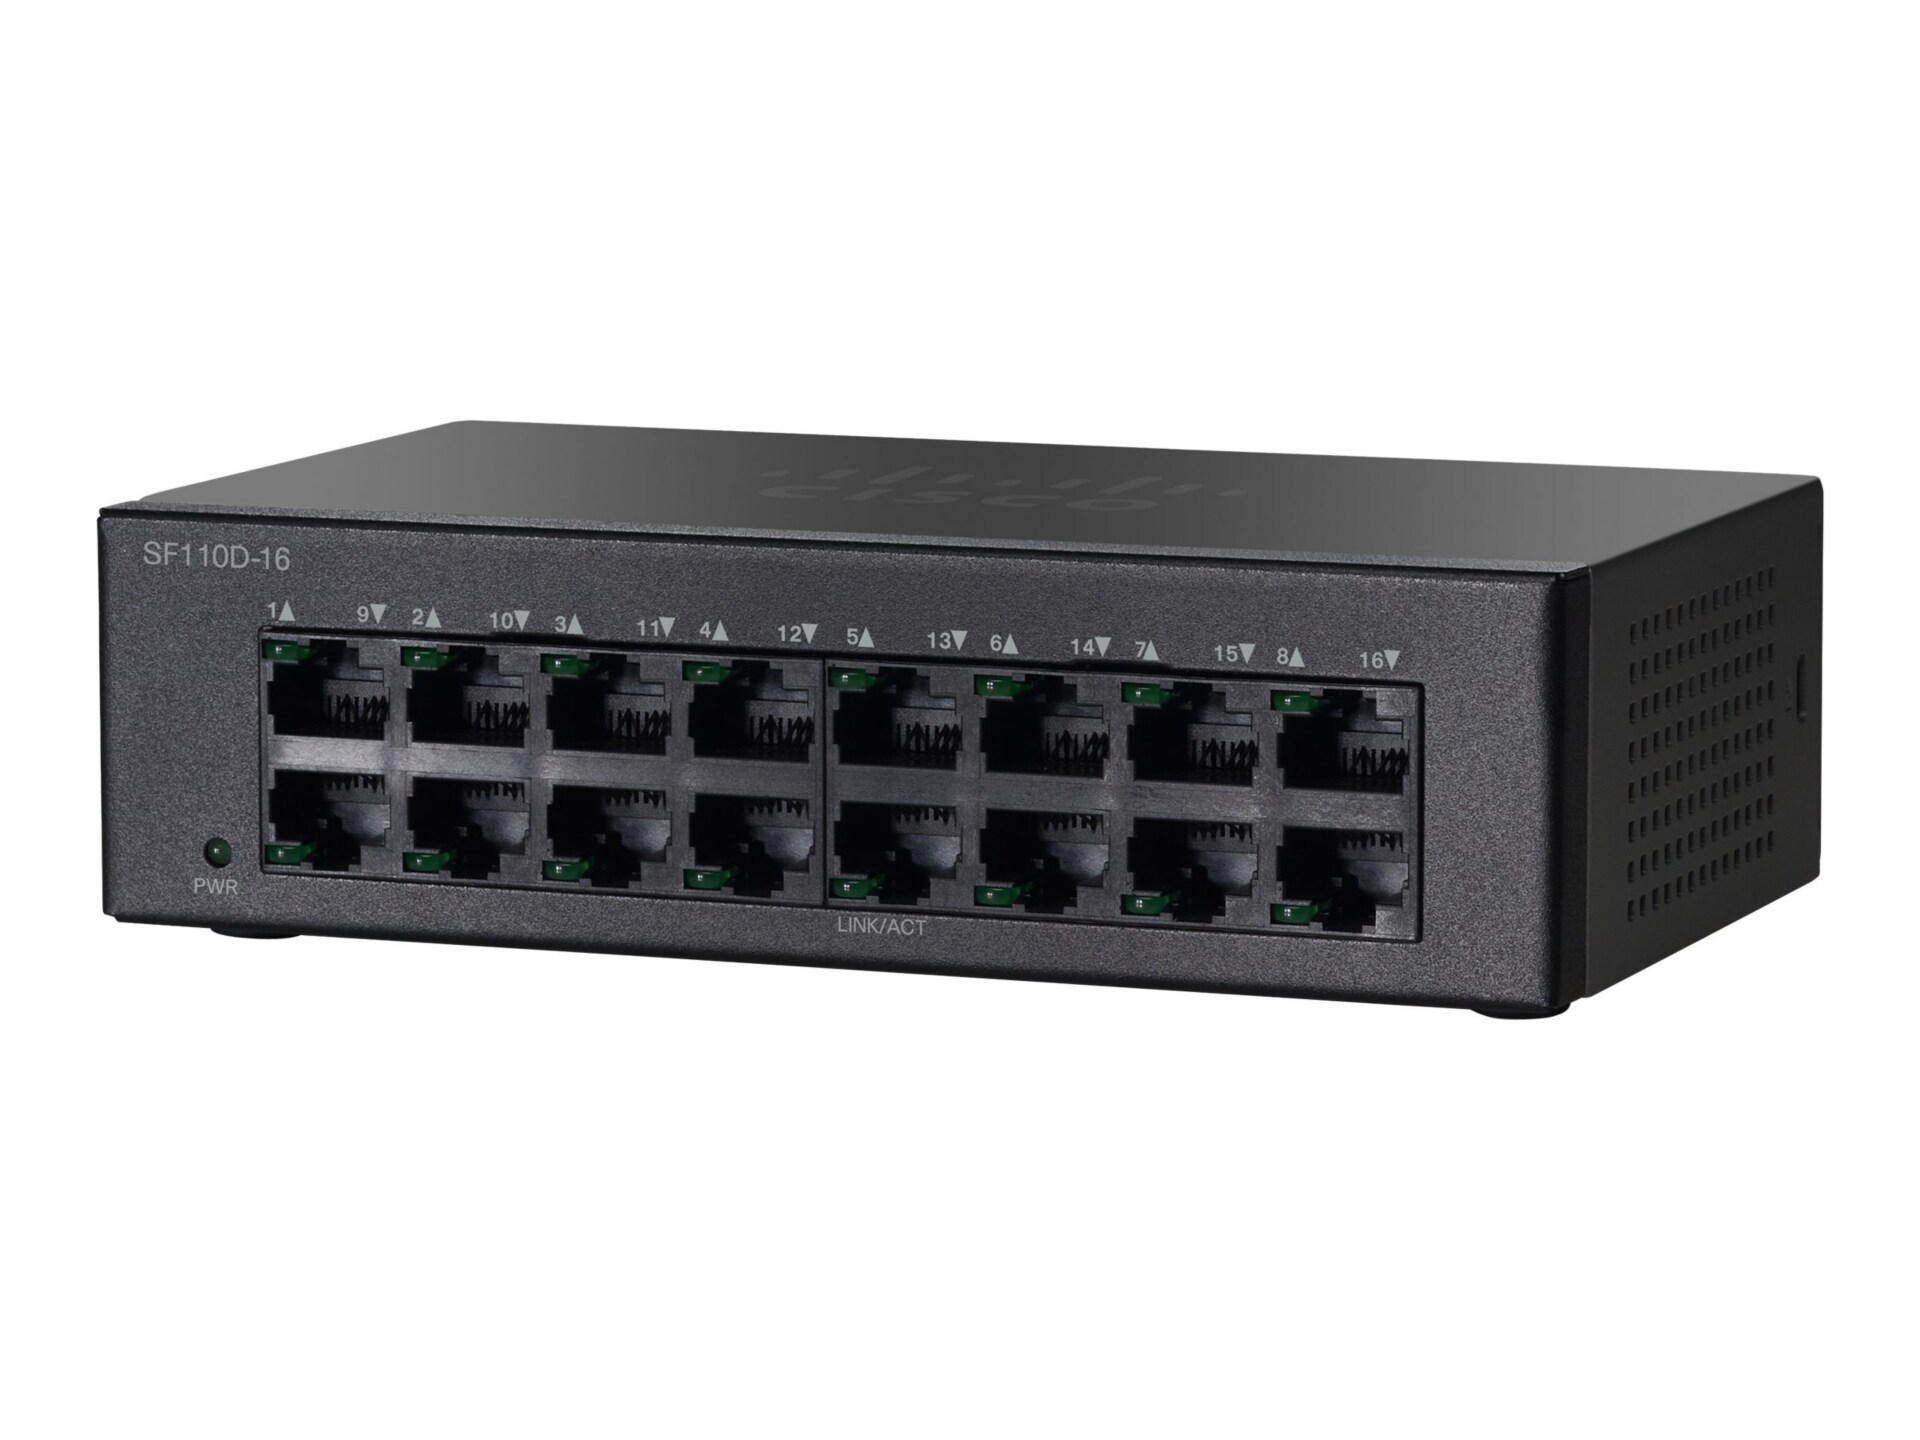 Cisco Small Business SF110D-16 - switch - 16 ports - unmanaged